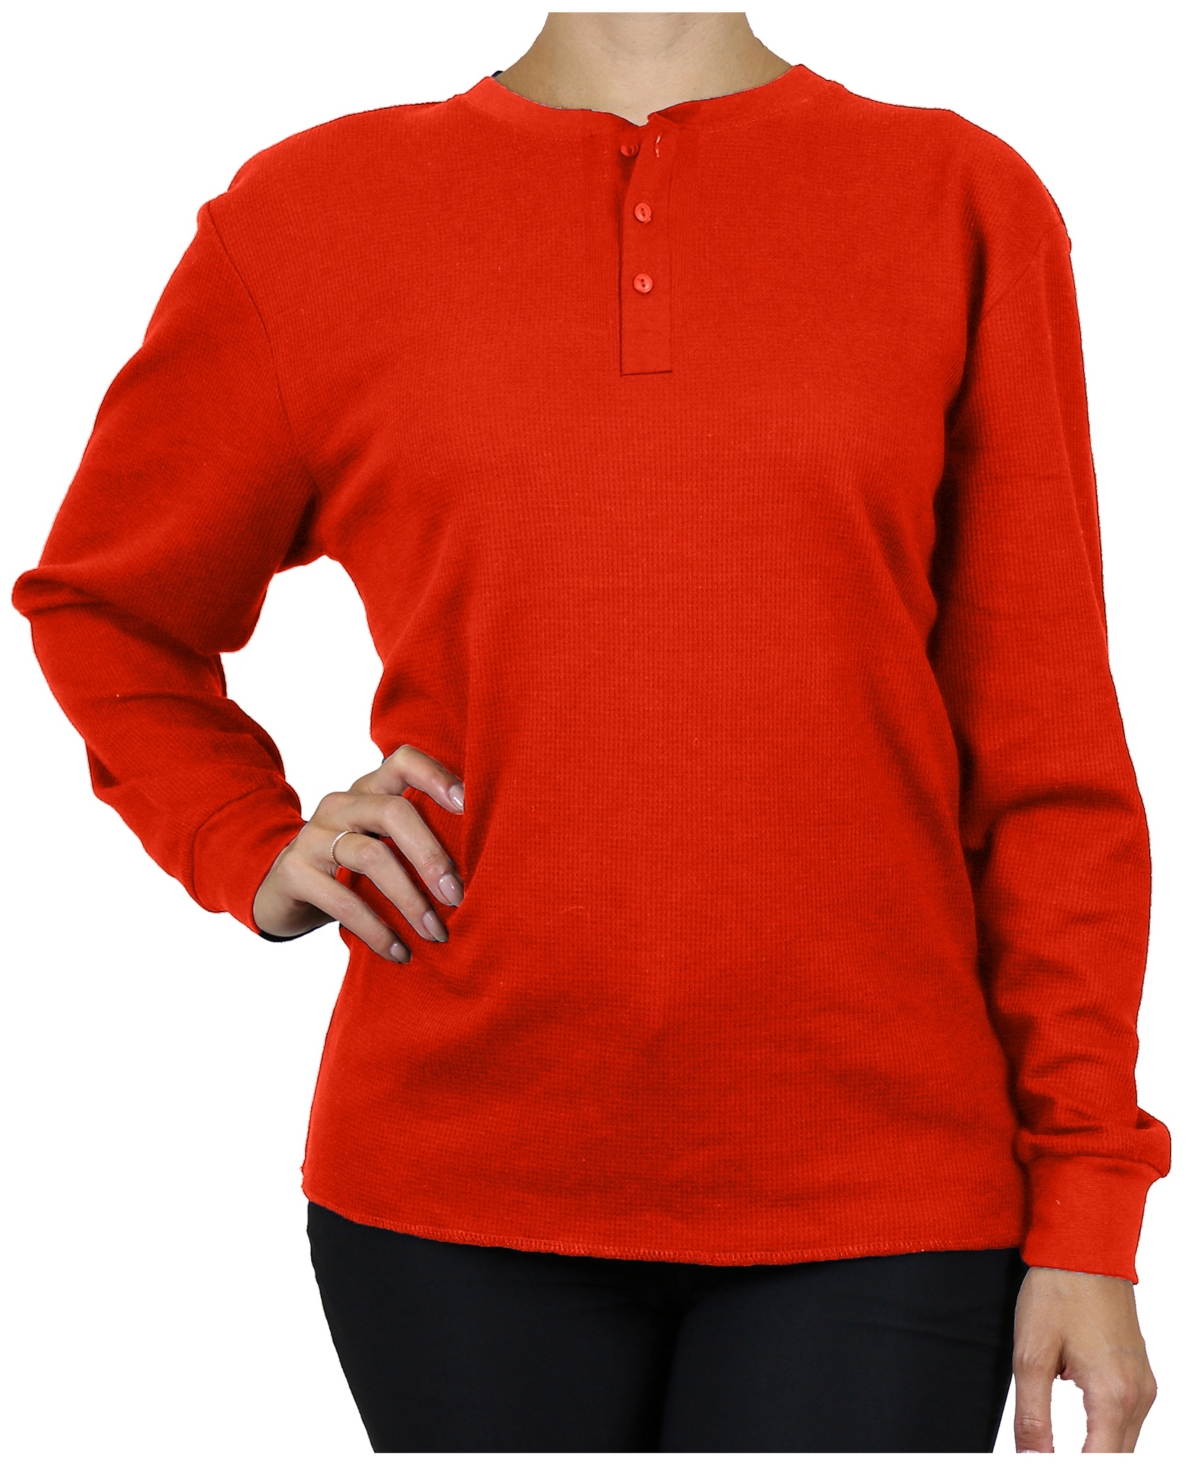 Galaxy By Harvic Women's Oversize Loose Fitting Waffle-knit Henley Thermal Sweater In Red